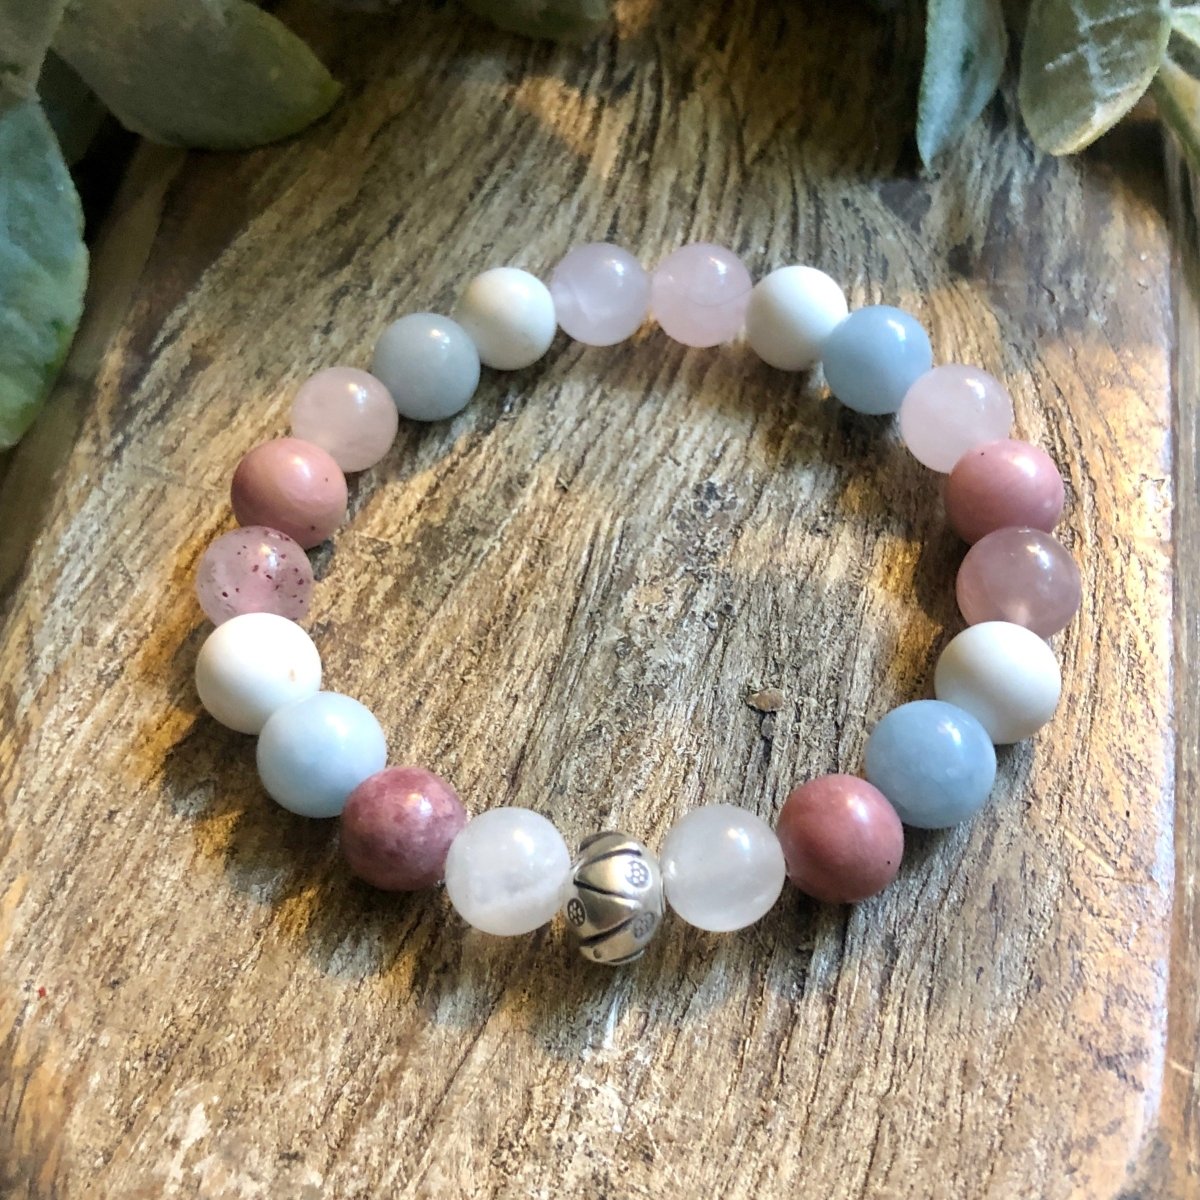 Pregnancy + Miscarriage Crystals and Bracelets